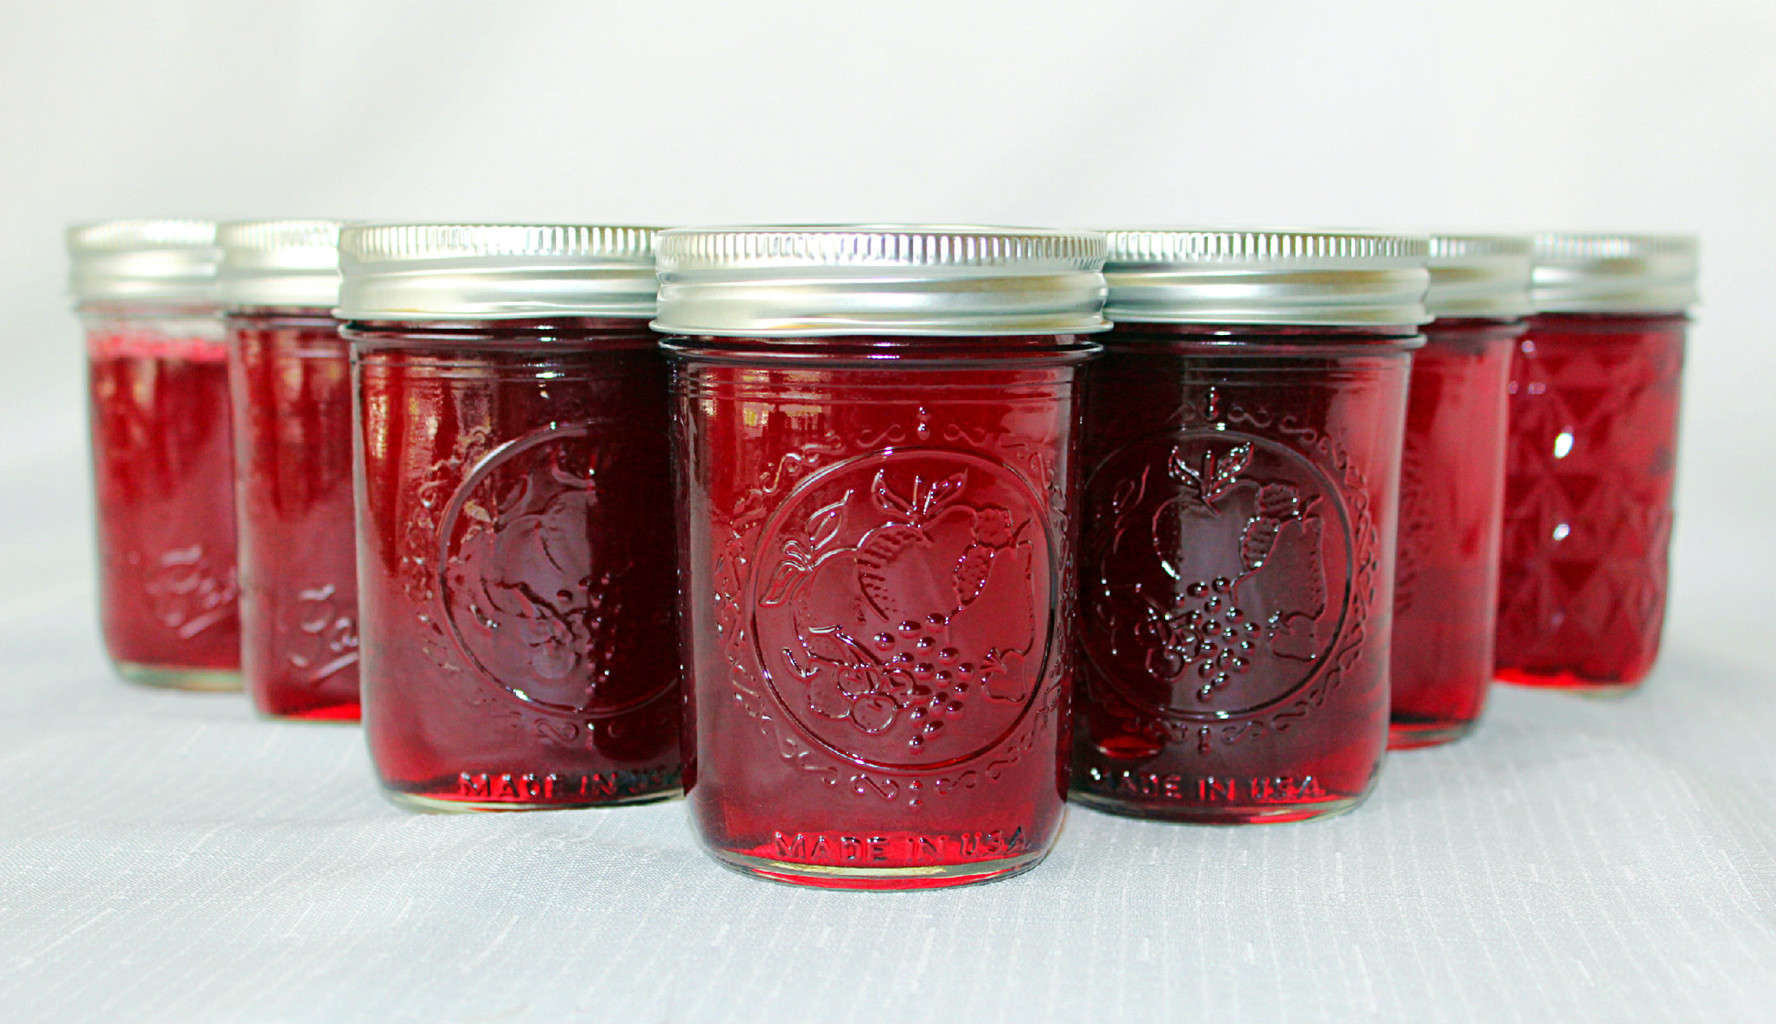 Muscadine Jelly in jars.